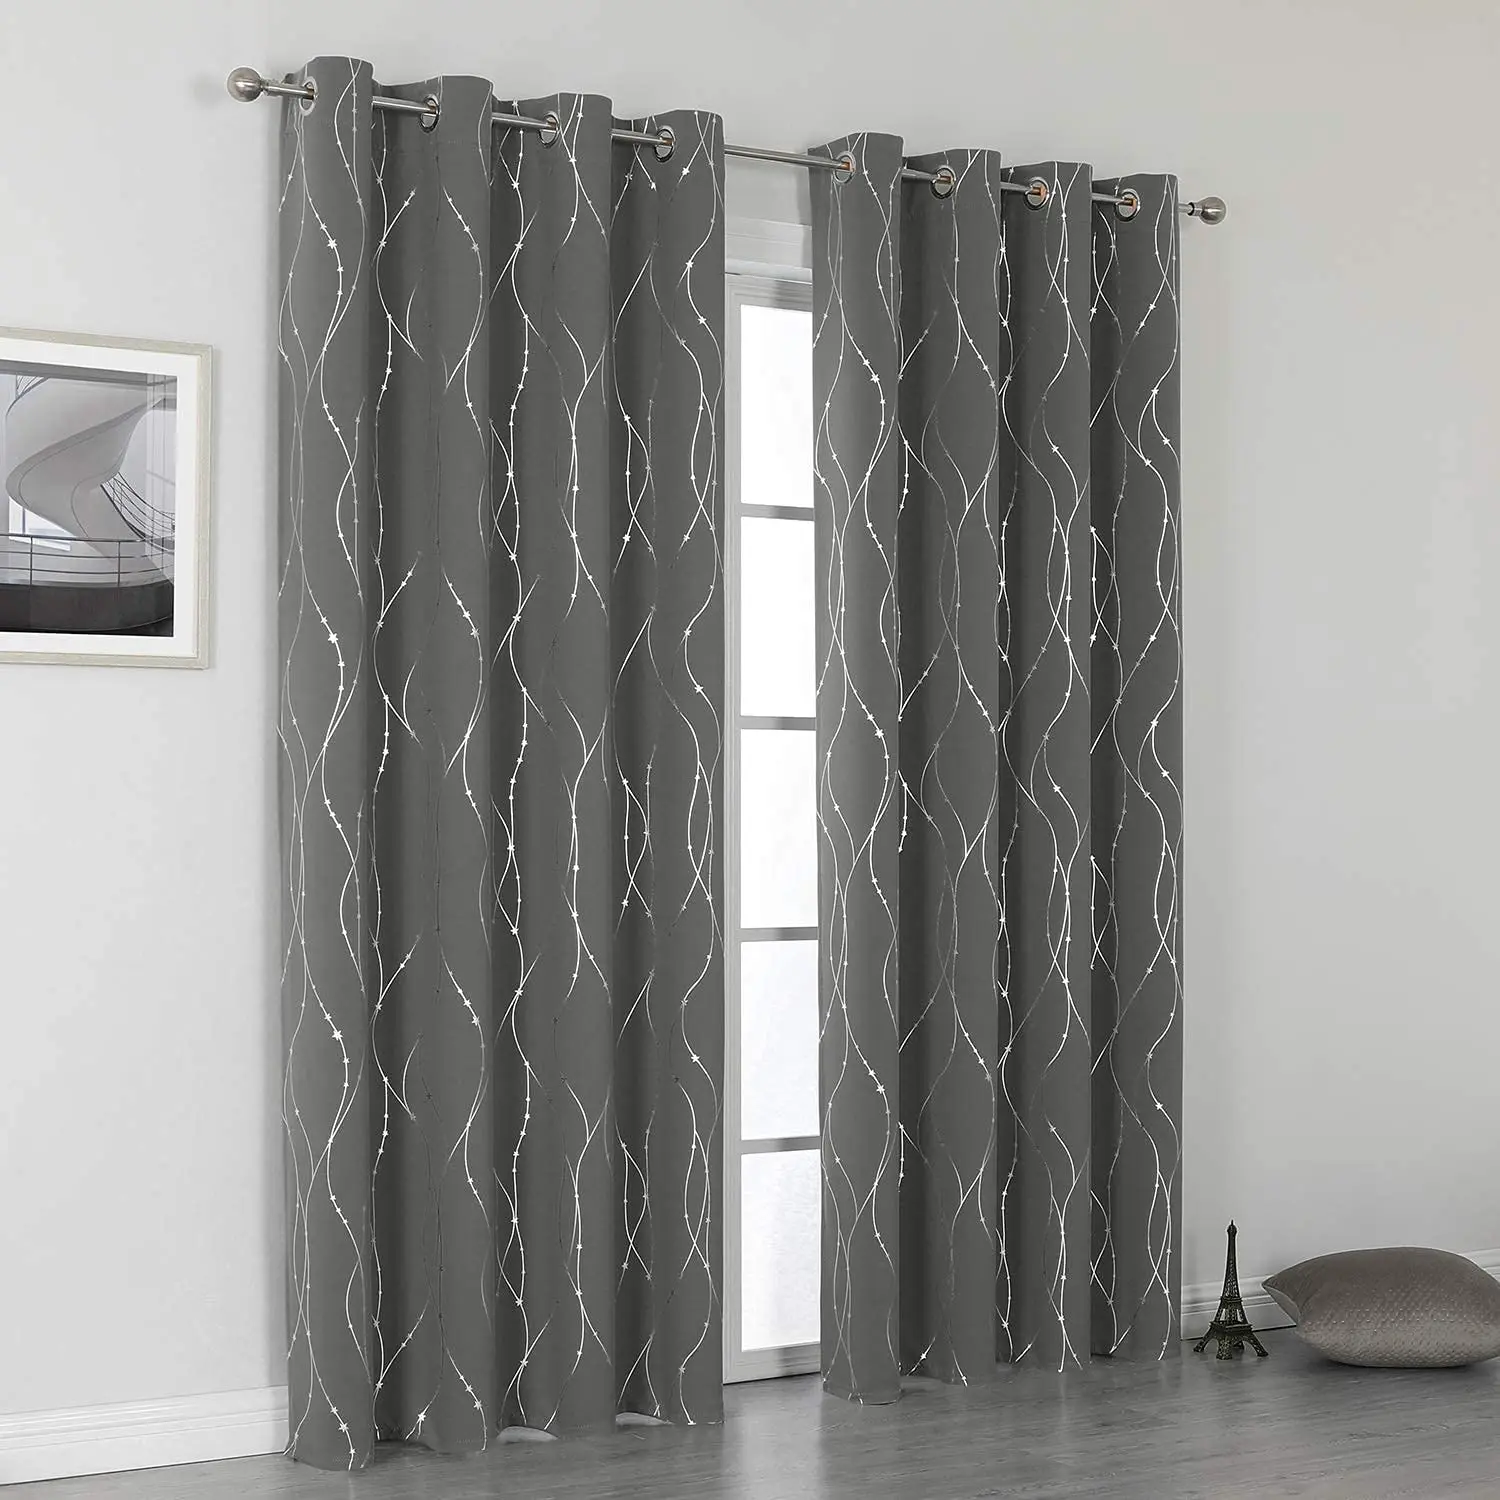 

Blackout Curtains for Living Room, Silver Star Printed Design, Darkening Insulated Window, Grommet Drapes for Bedroom, 2 Panels